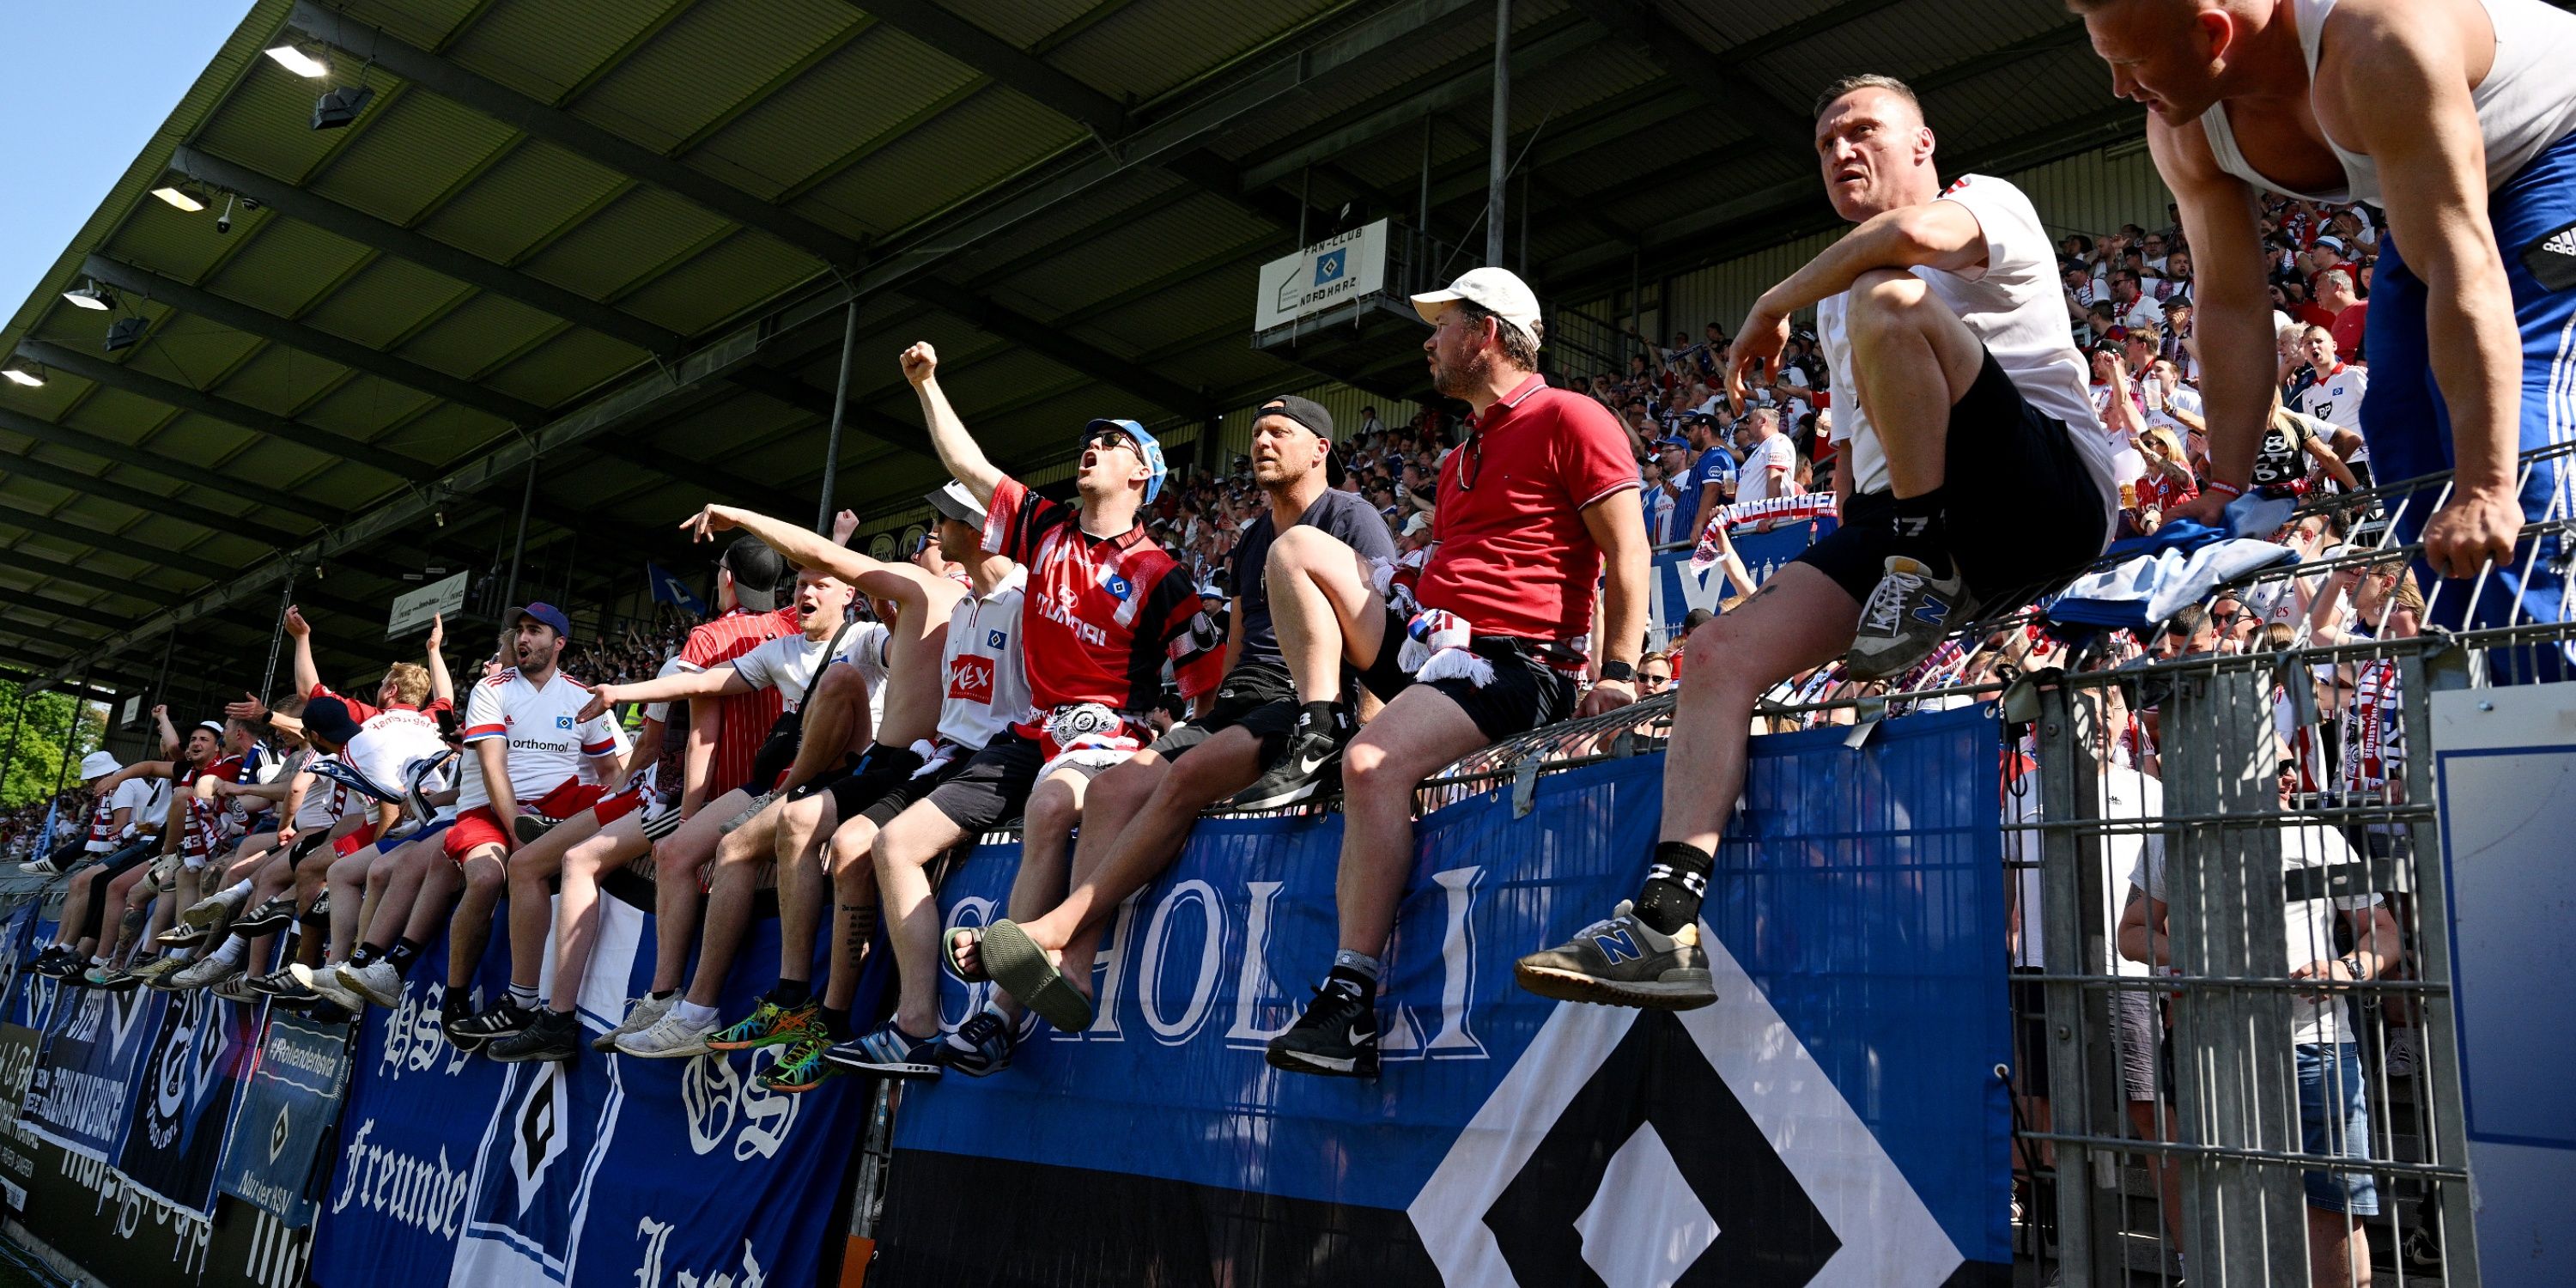 Hamburger SV fans celebrate after the team's victory.